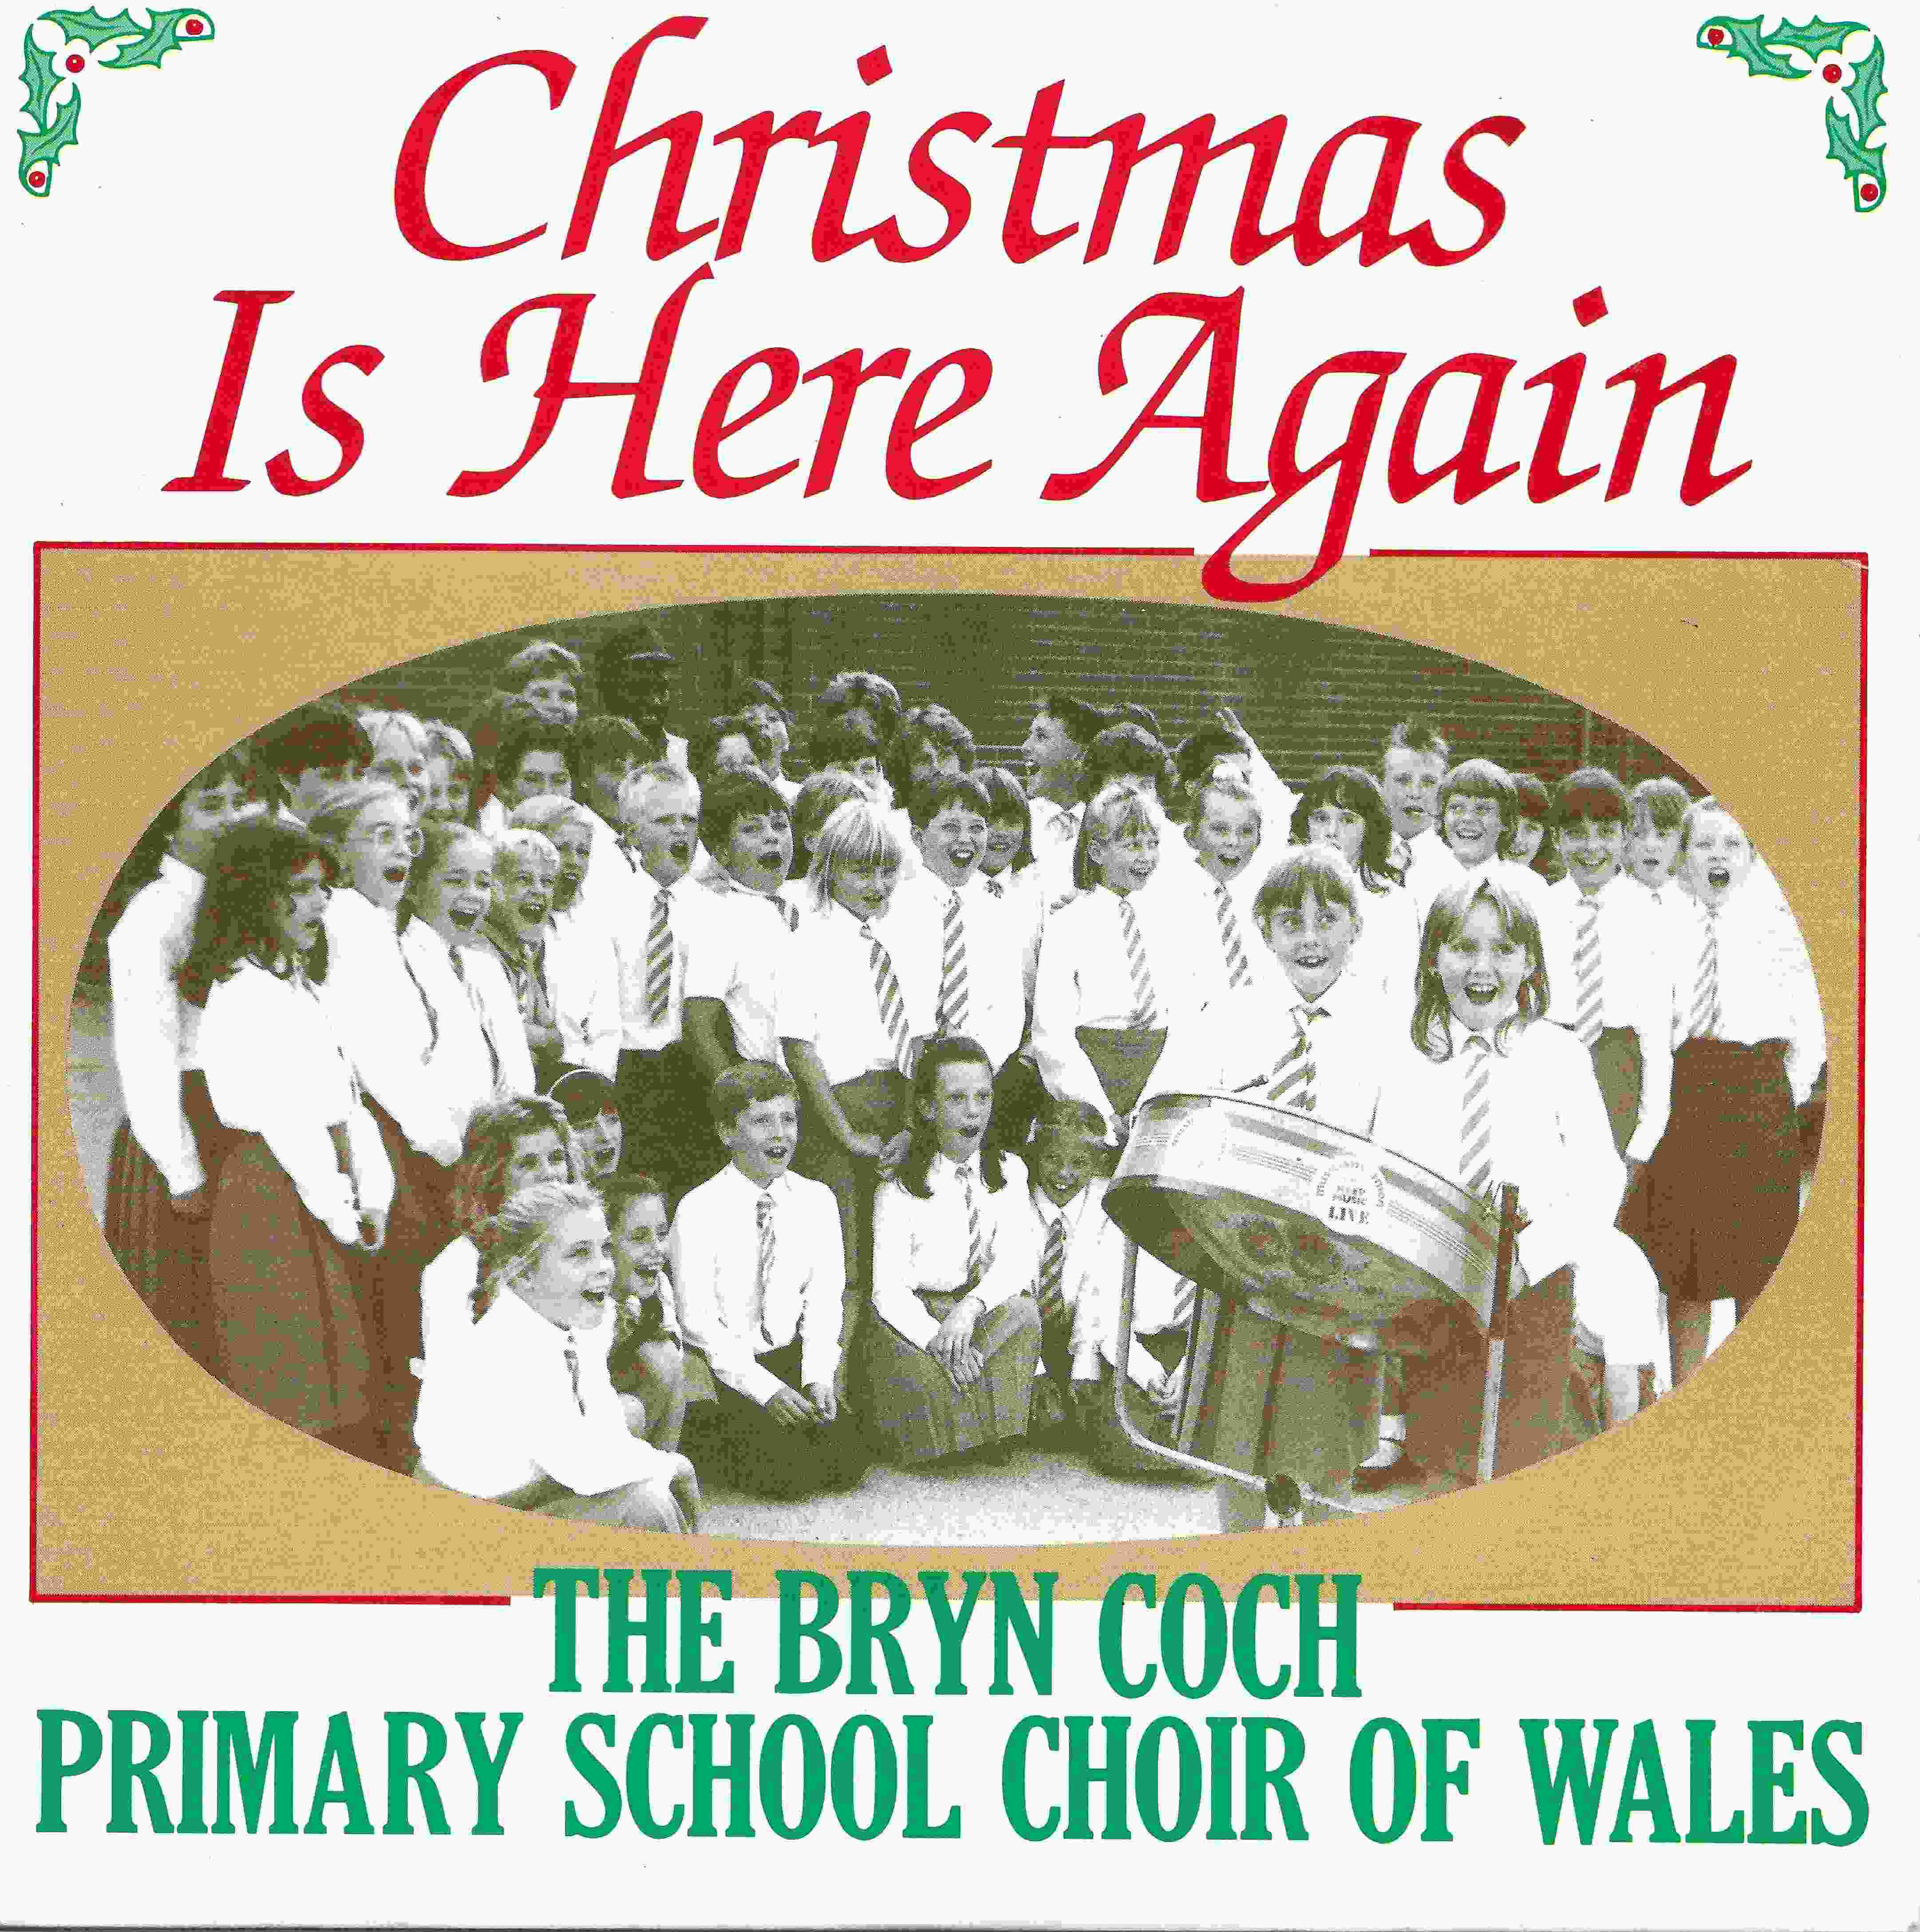 Picture of Christmas is here again by artist The Bryn Coch Primary School Choir of Wales from the BBC singles - Records and Tapes library